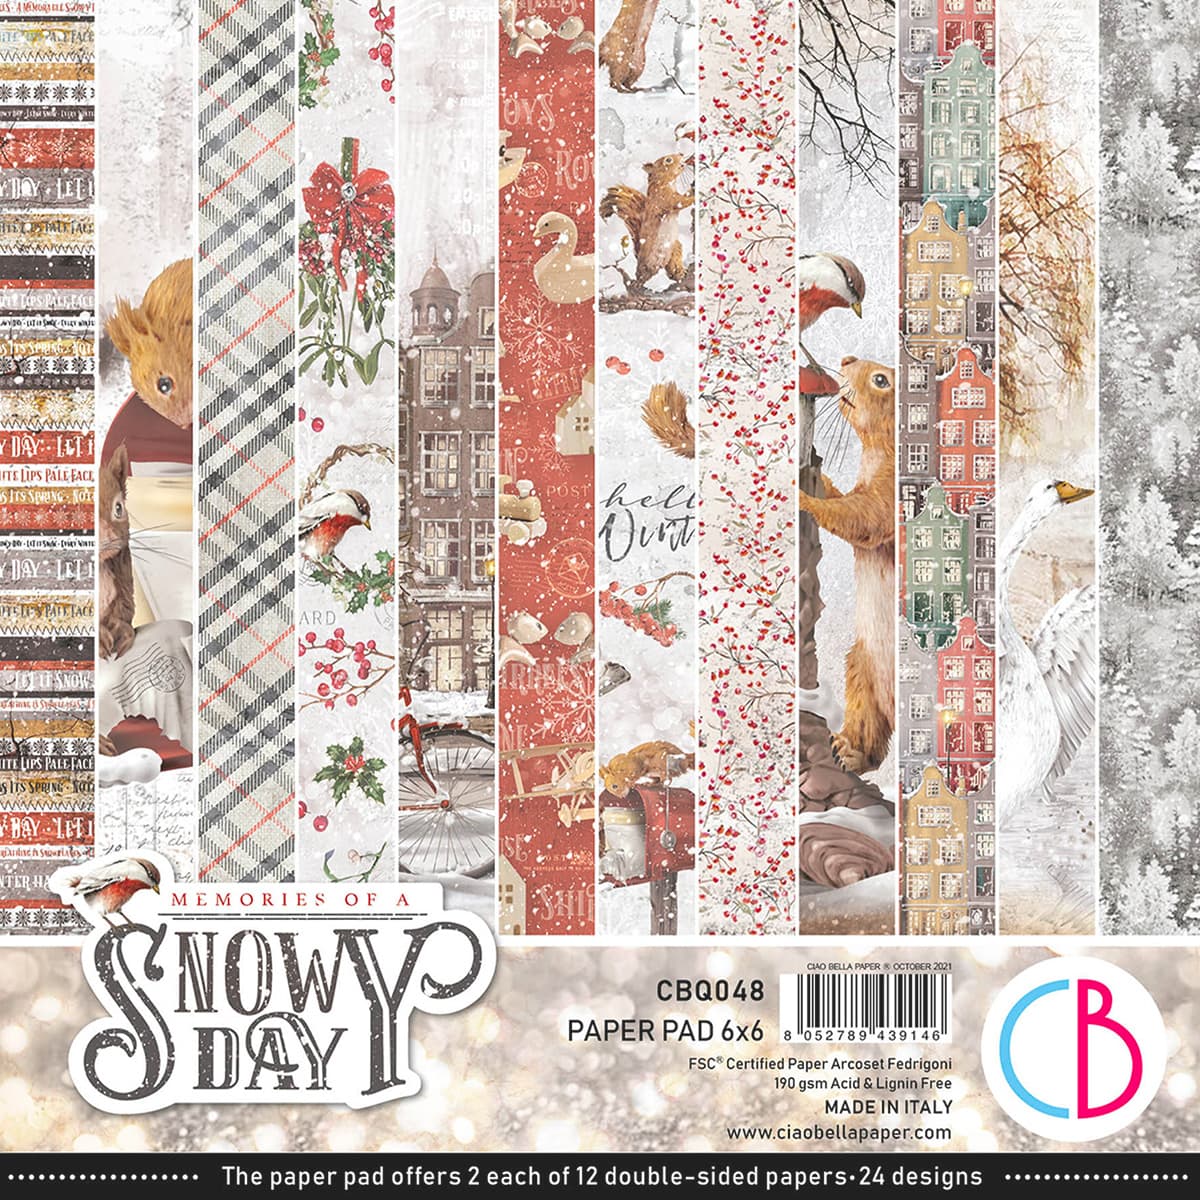 MEMORIES OF A SNOWY DAY PAPER PAD 6"X6" 24/PKG